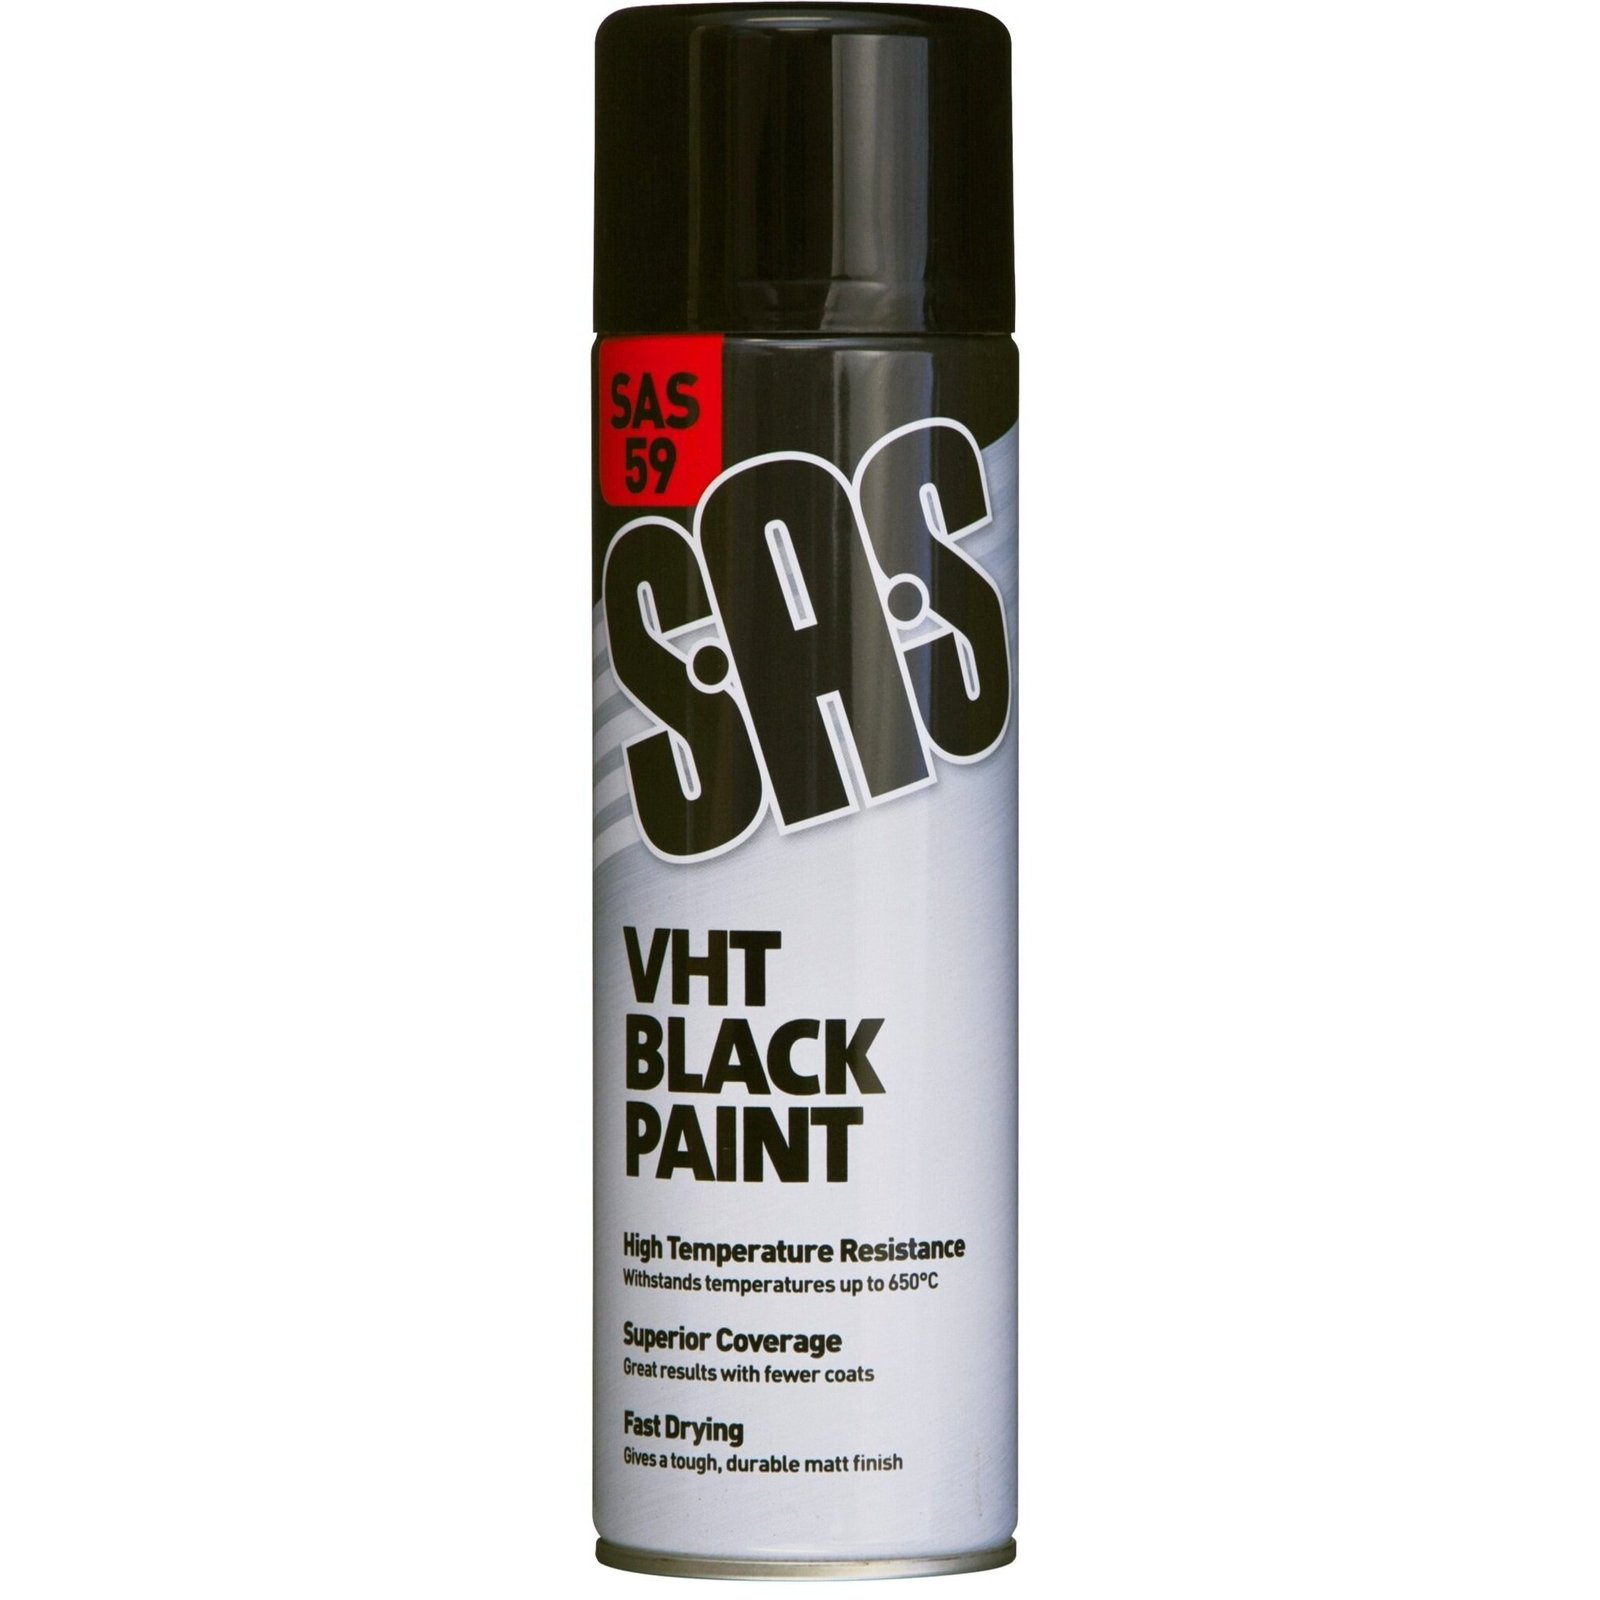 S.A.S Black VHT Paint – Very High Temperature 650°C – 500ml